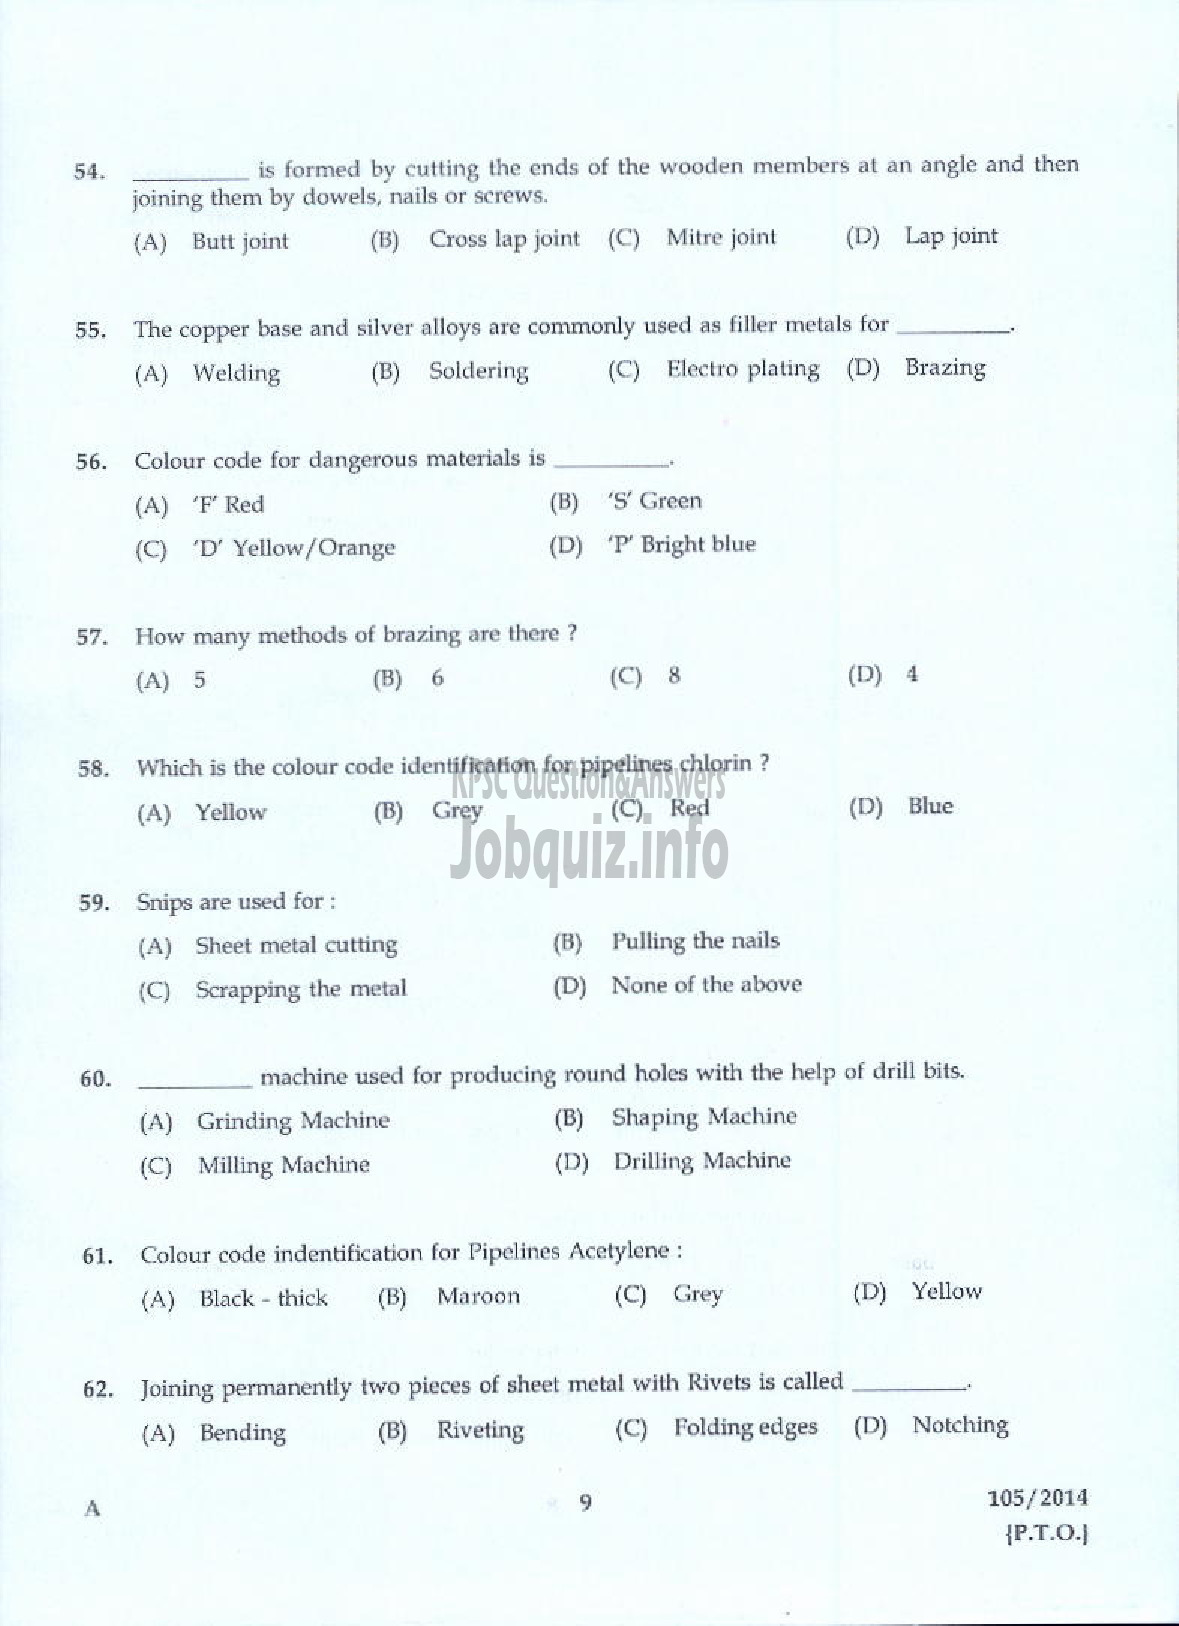 Kerala PSC Question Paper - PAINTER KERALA AGRO MACHINERY CORPORATION LIMITED-7